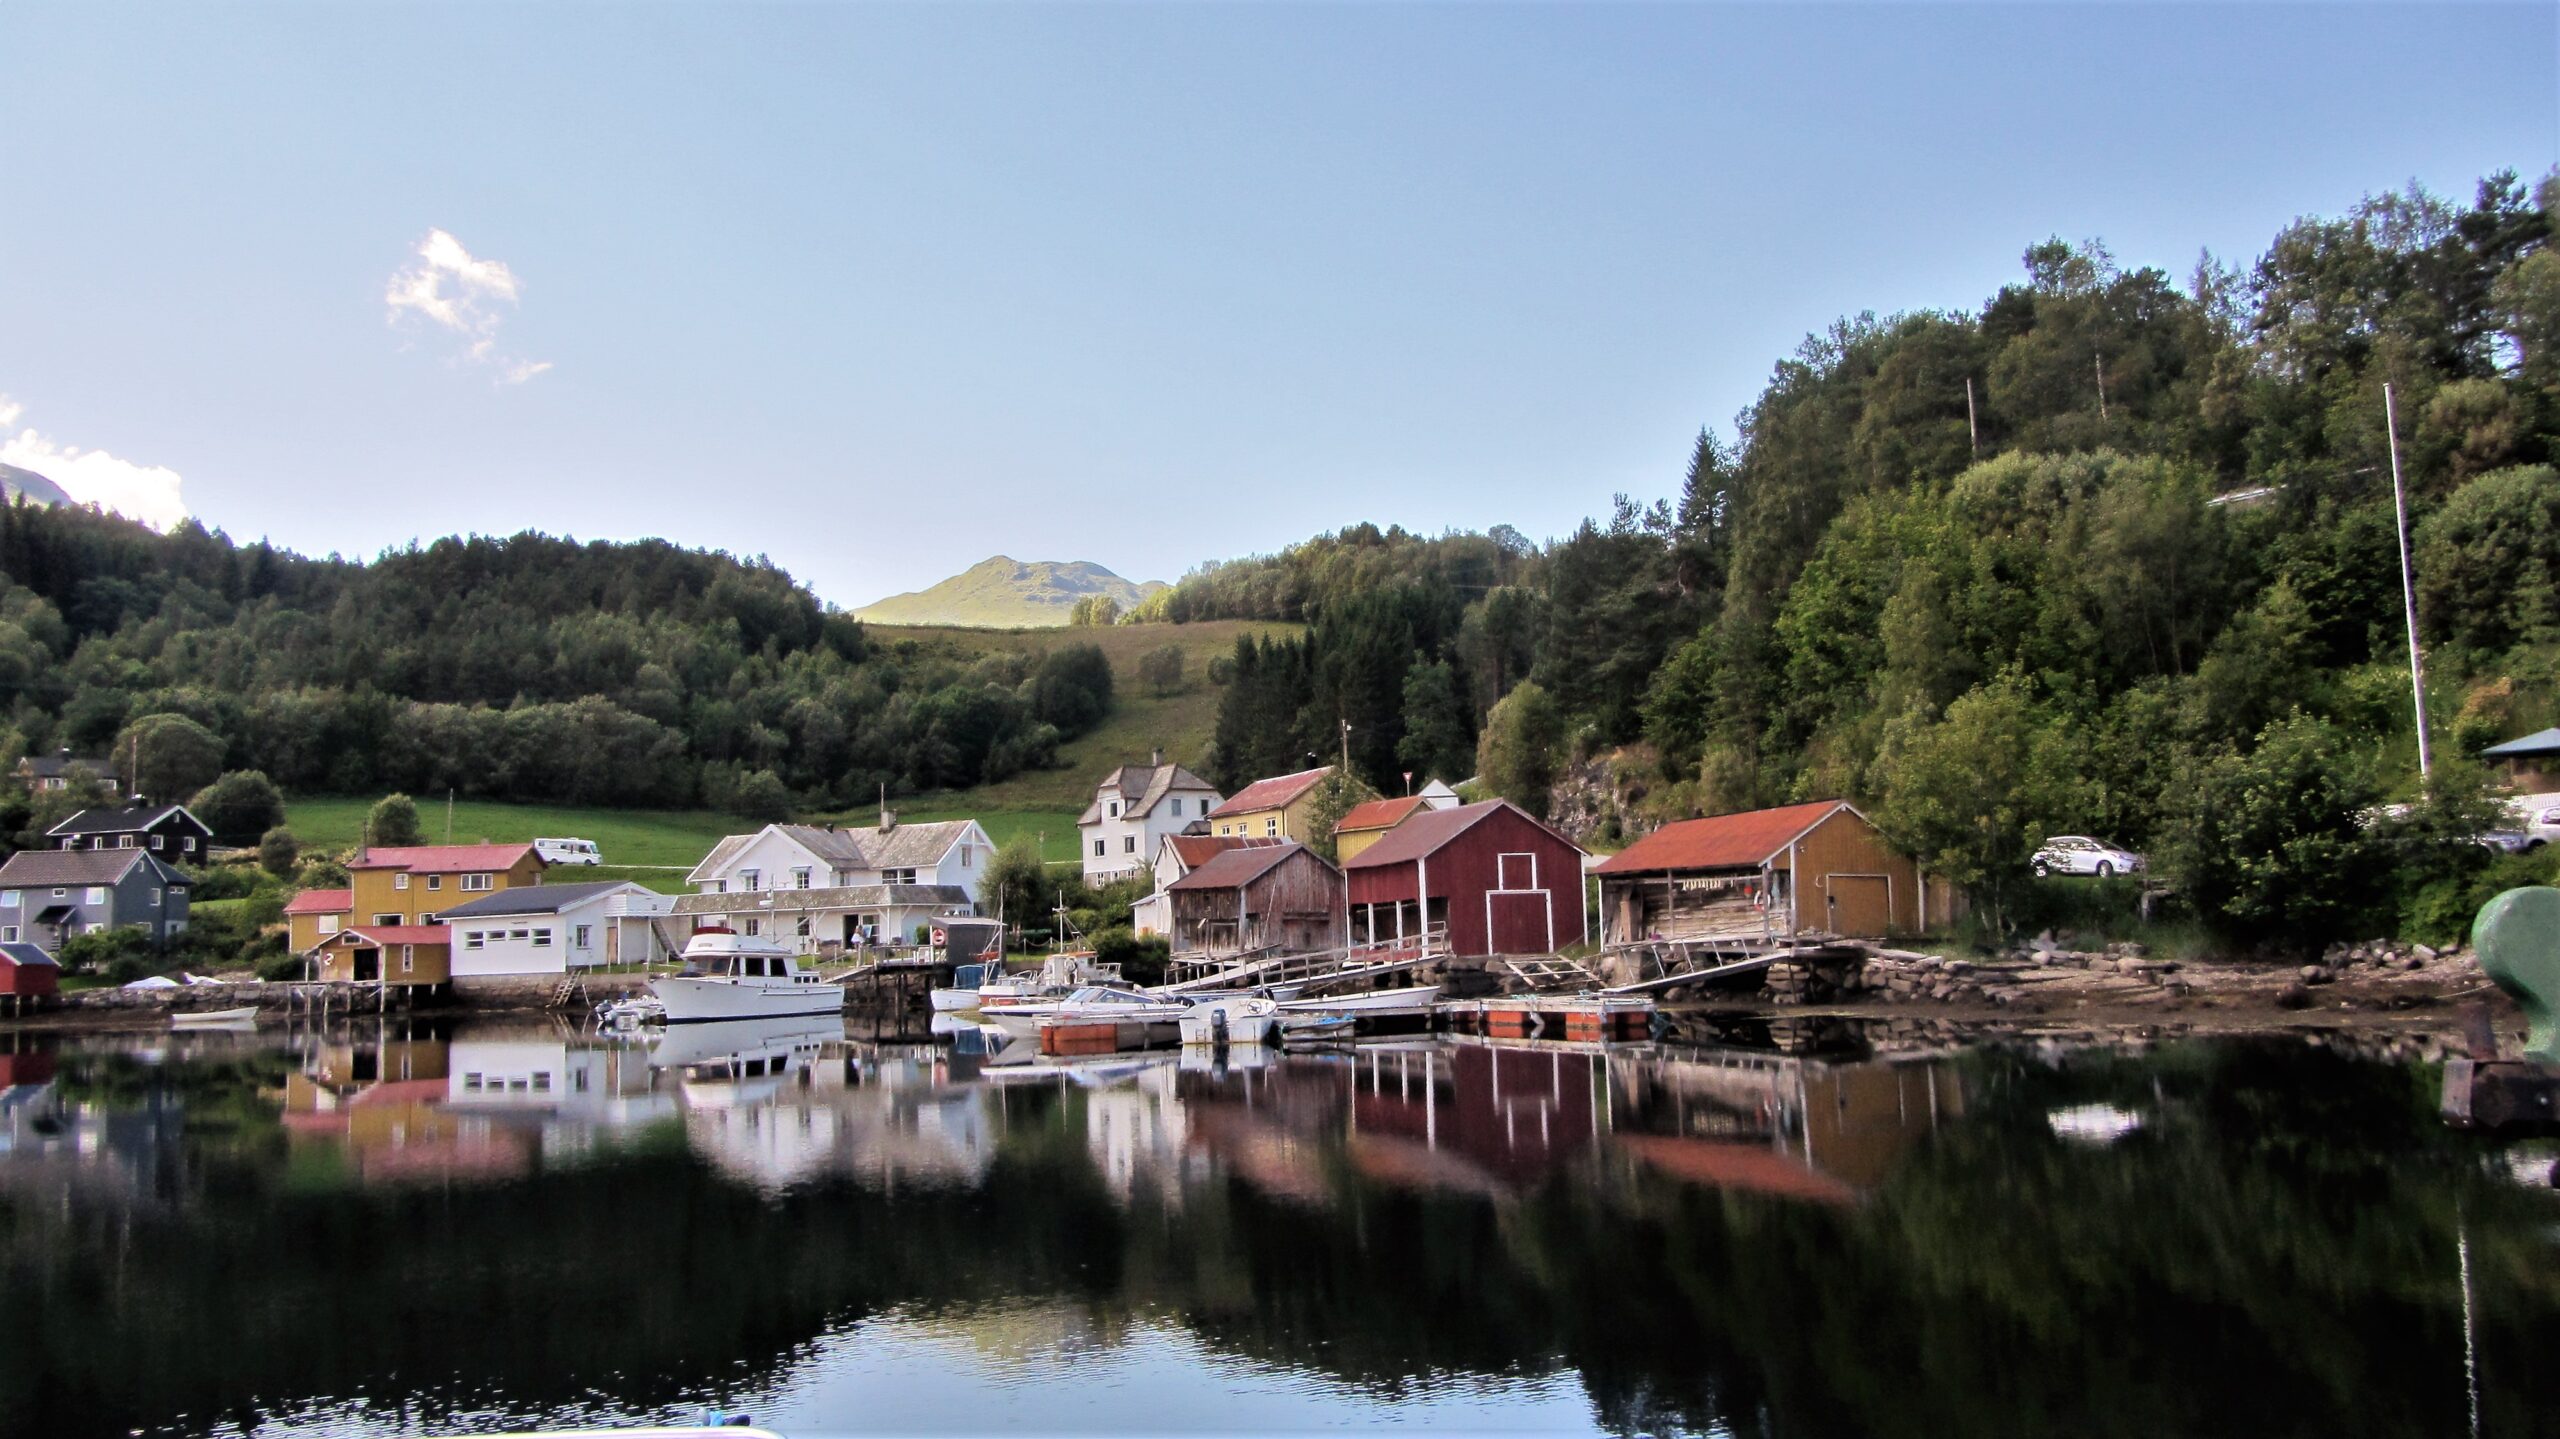 Halsa, Norway: Caring for The Past is Preparing for The Future